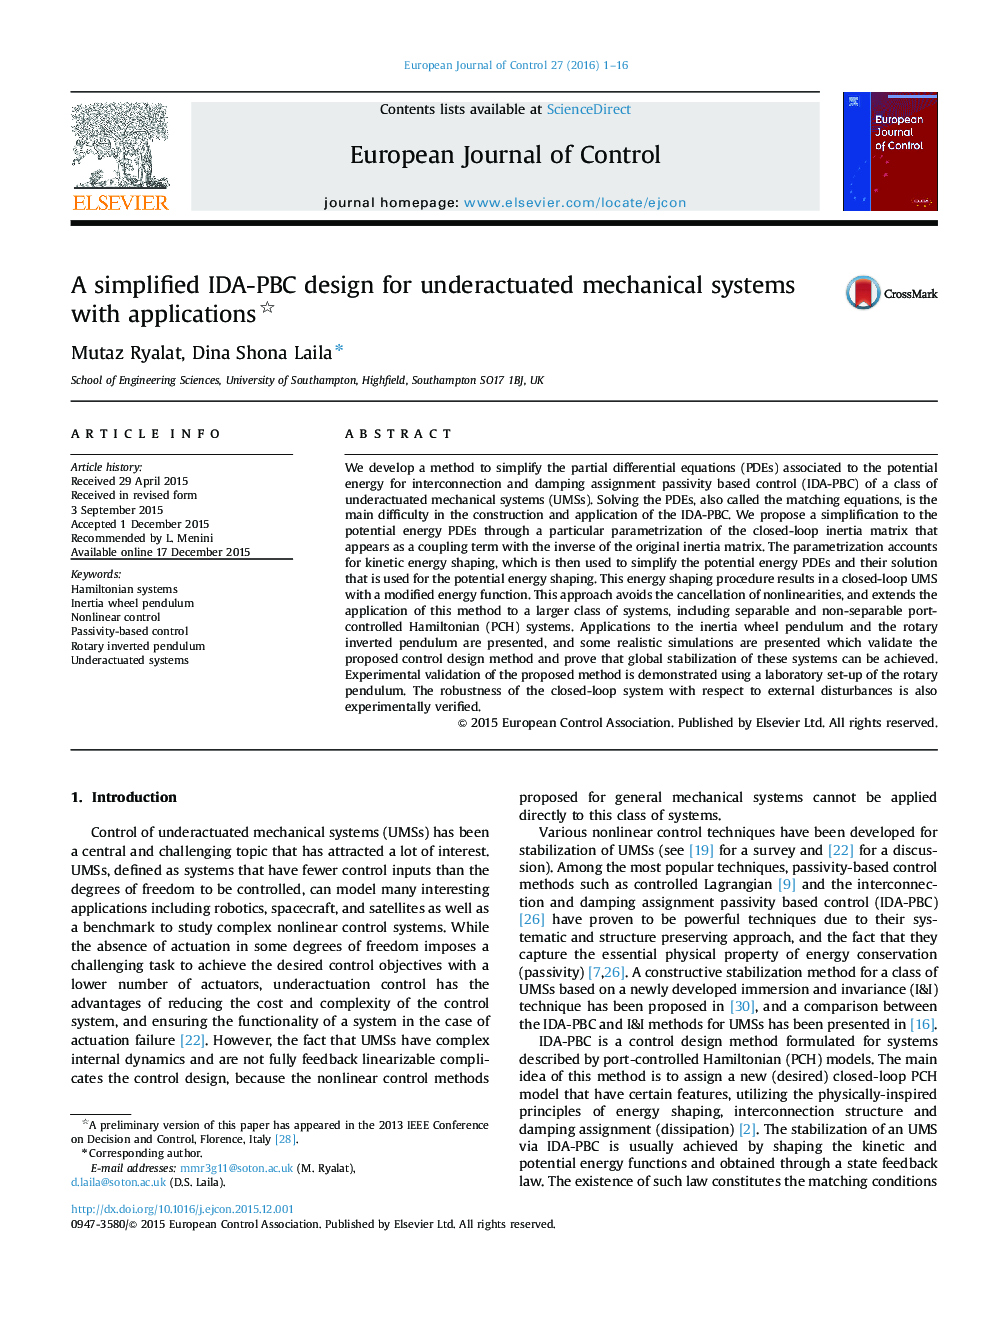 A simplified IDA-PBC design for underactuated mechanical systems with applications 